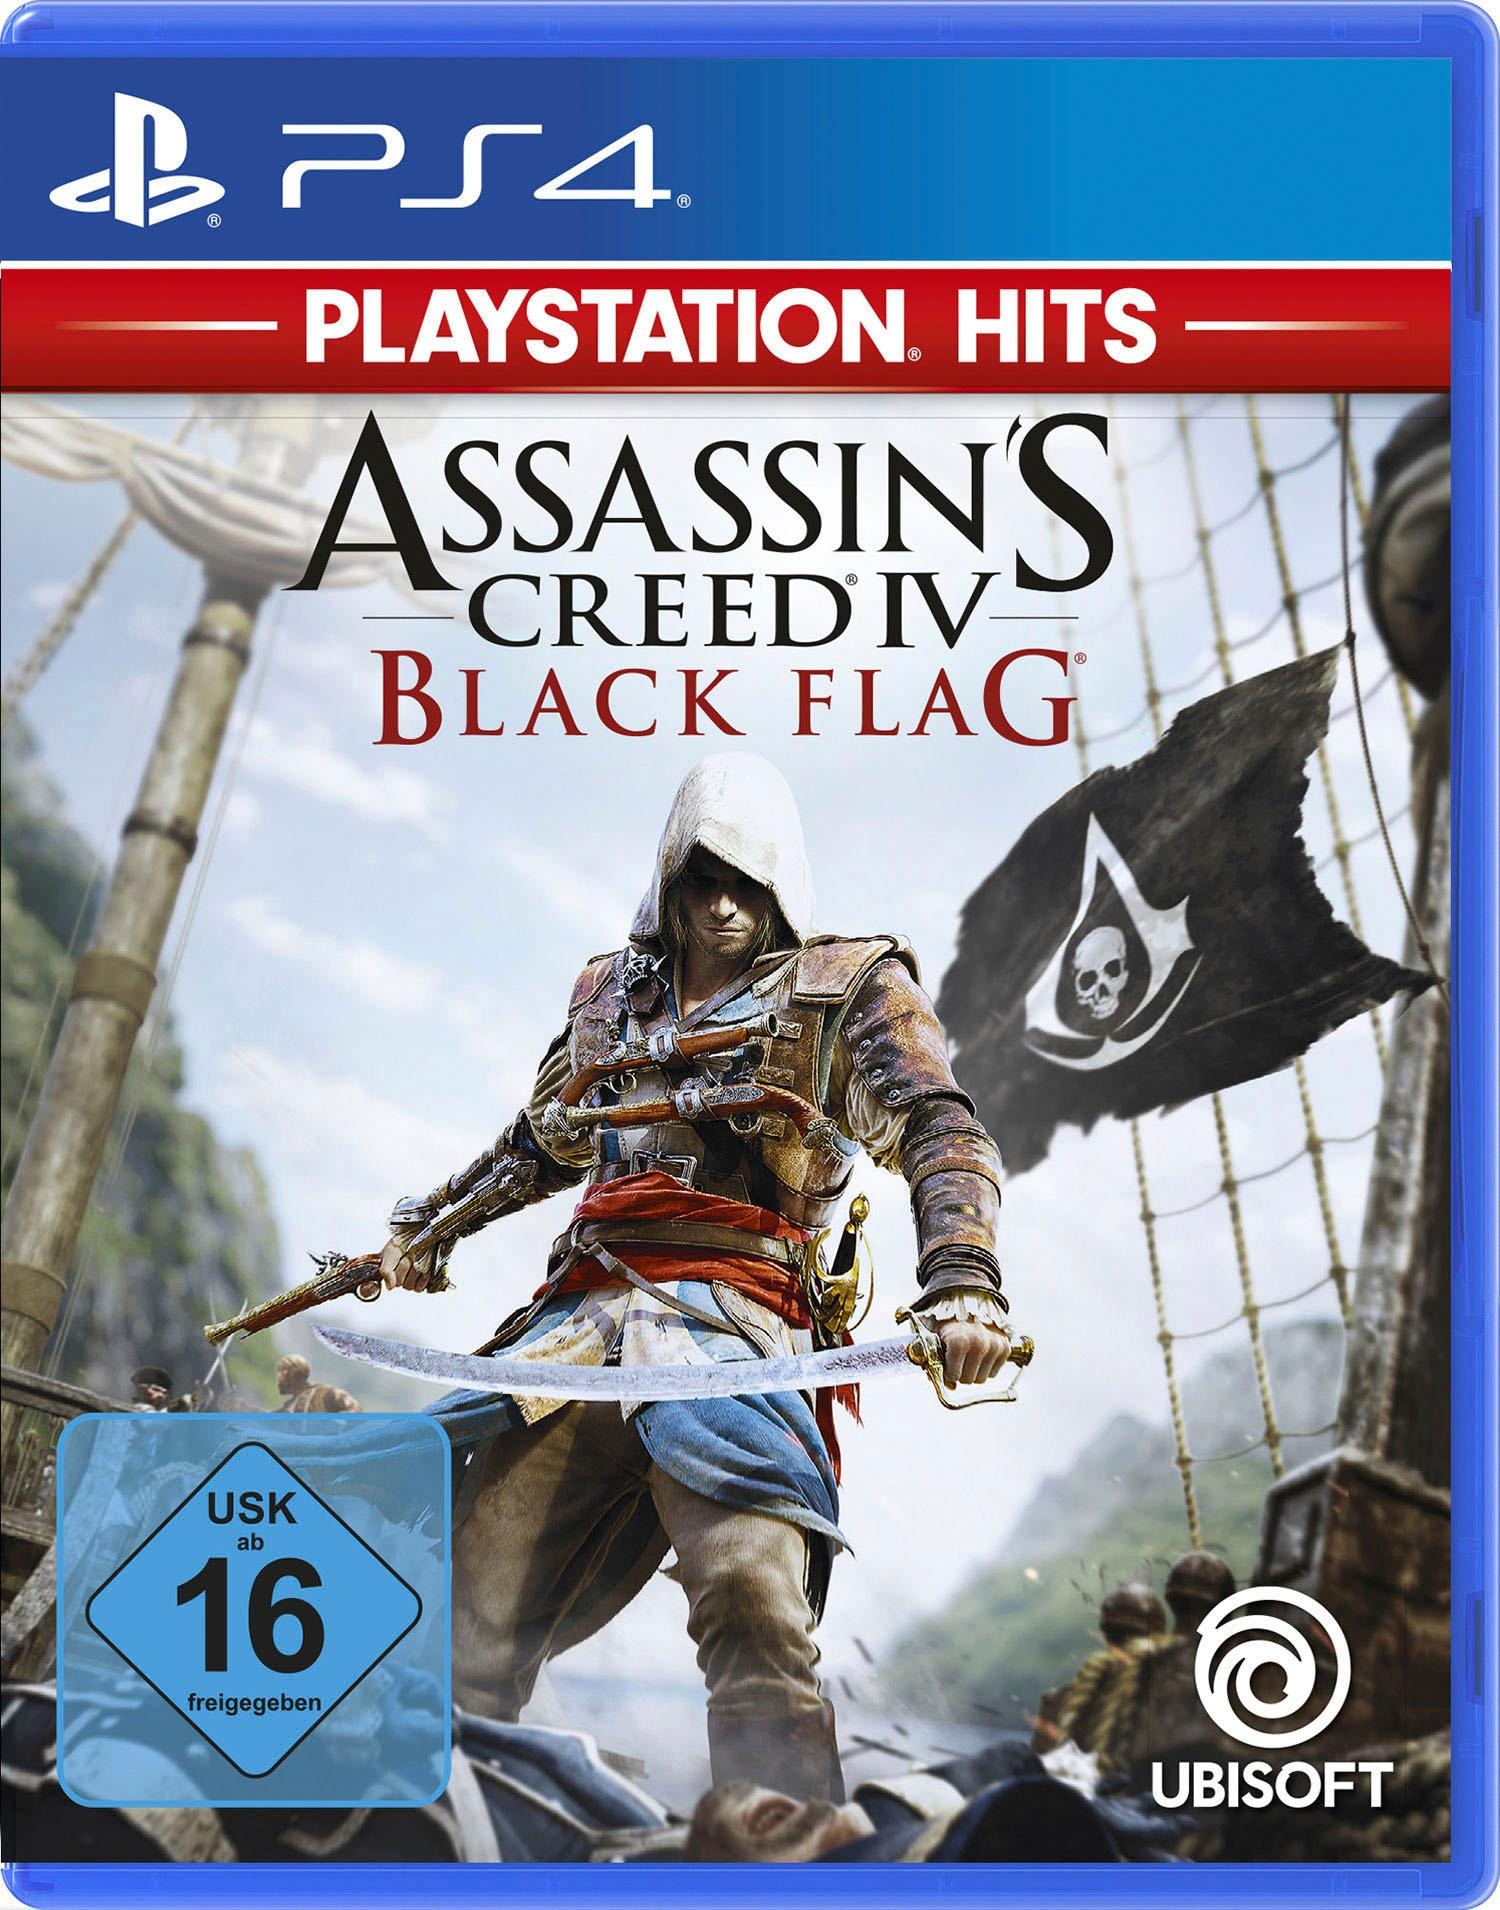 Spielesoftware »Assassin's Creed 4 Black Flag«, PlayStation 4, Software Pyramide